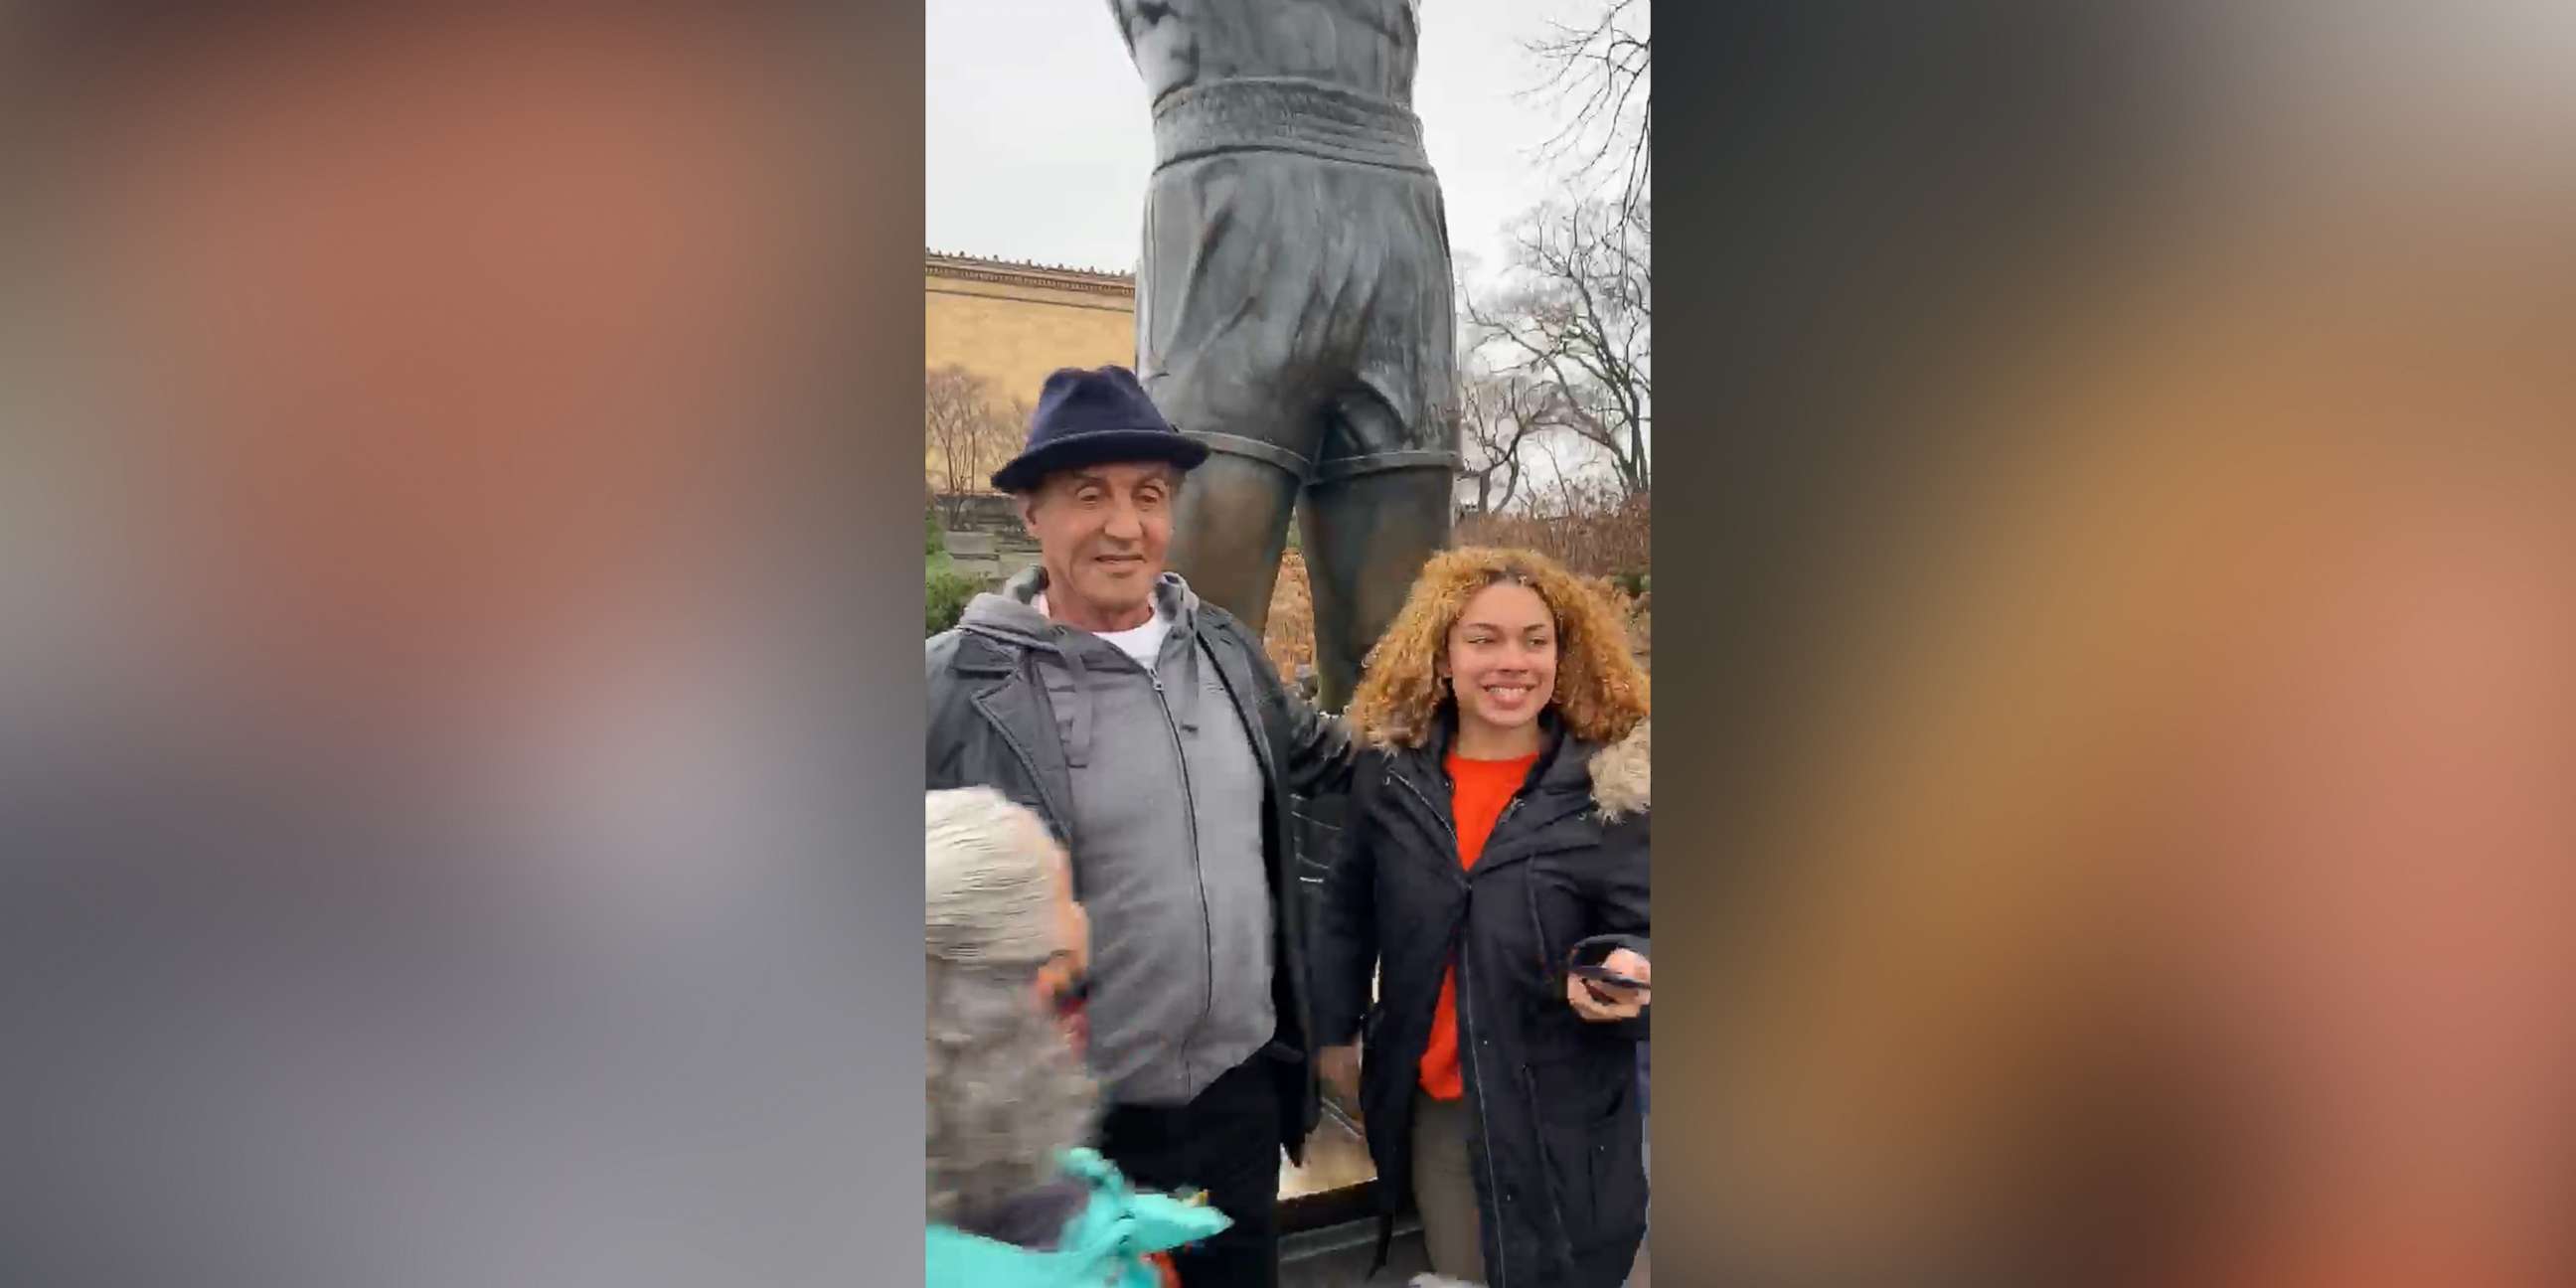 PHOTO: Sylvester Stallone surprised a group of students visiting his famous bronze statue in front of the Philadelphia Museum of Art, Dec. 16, 2019.